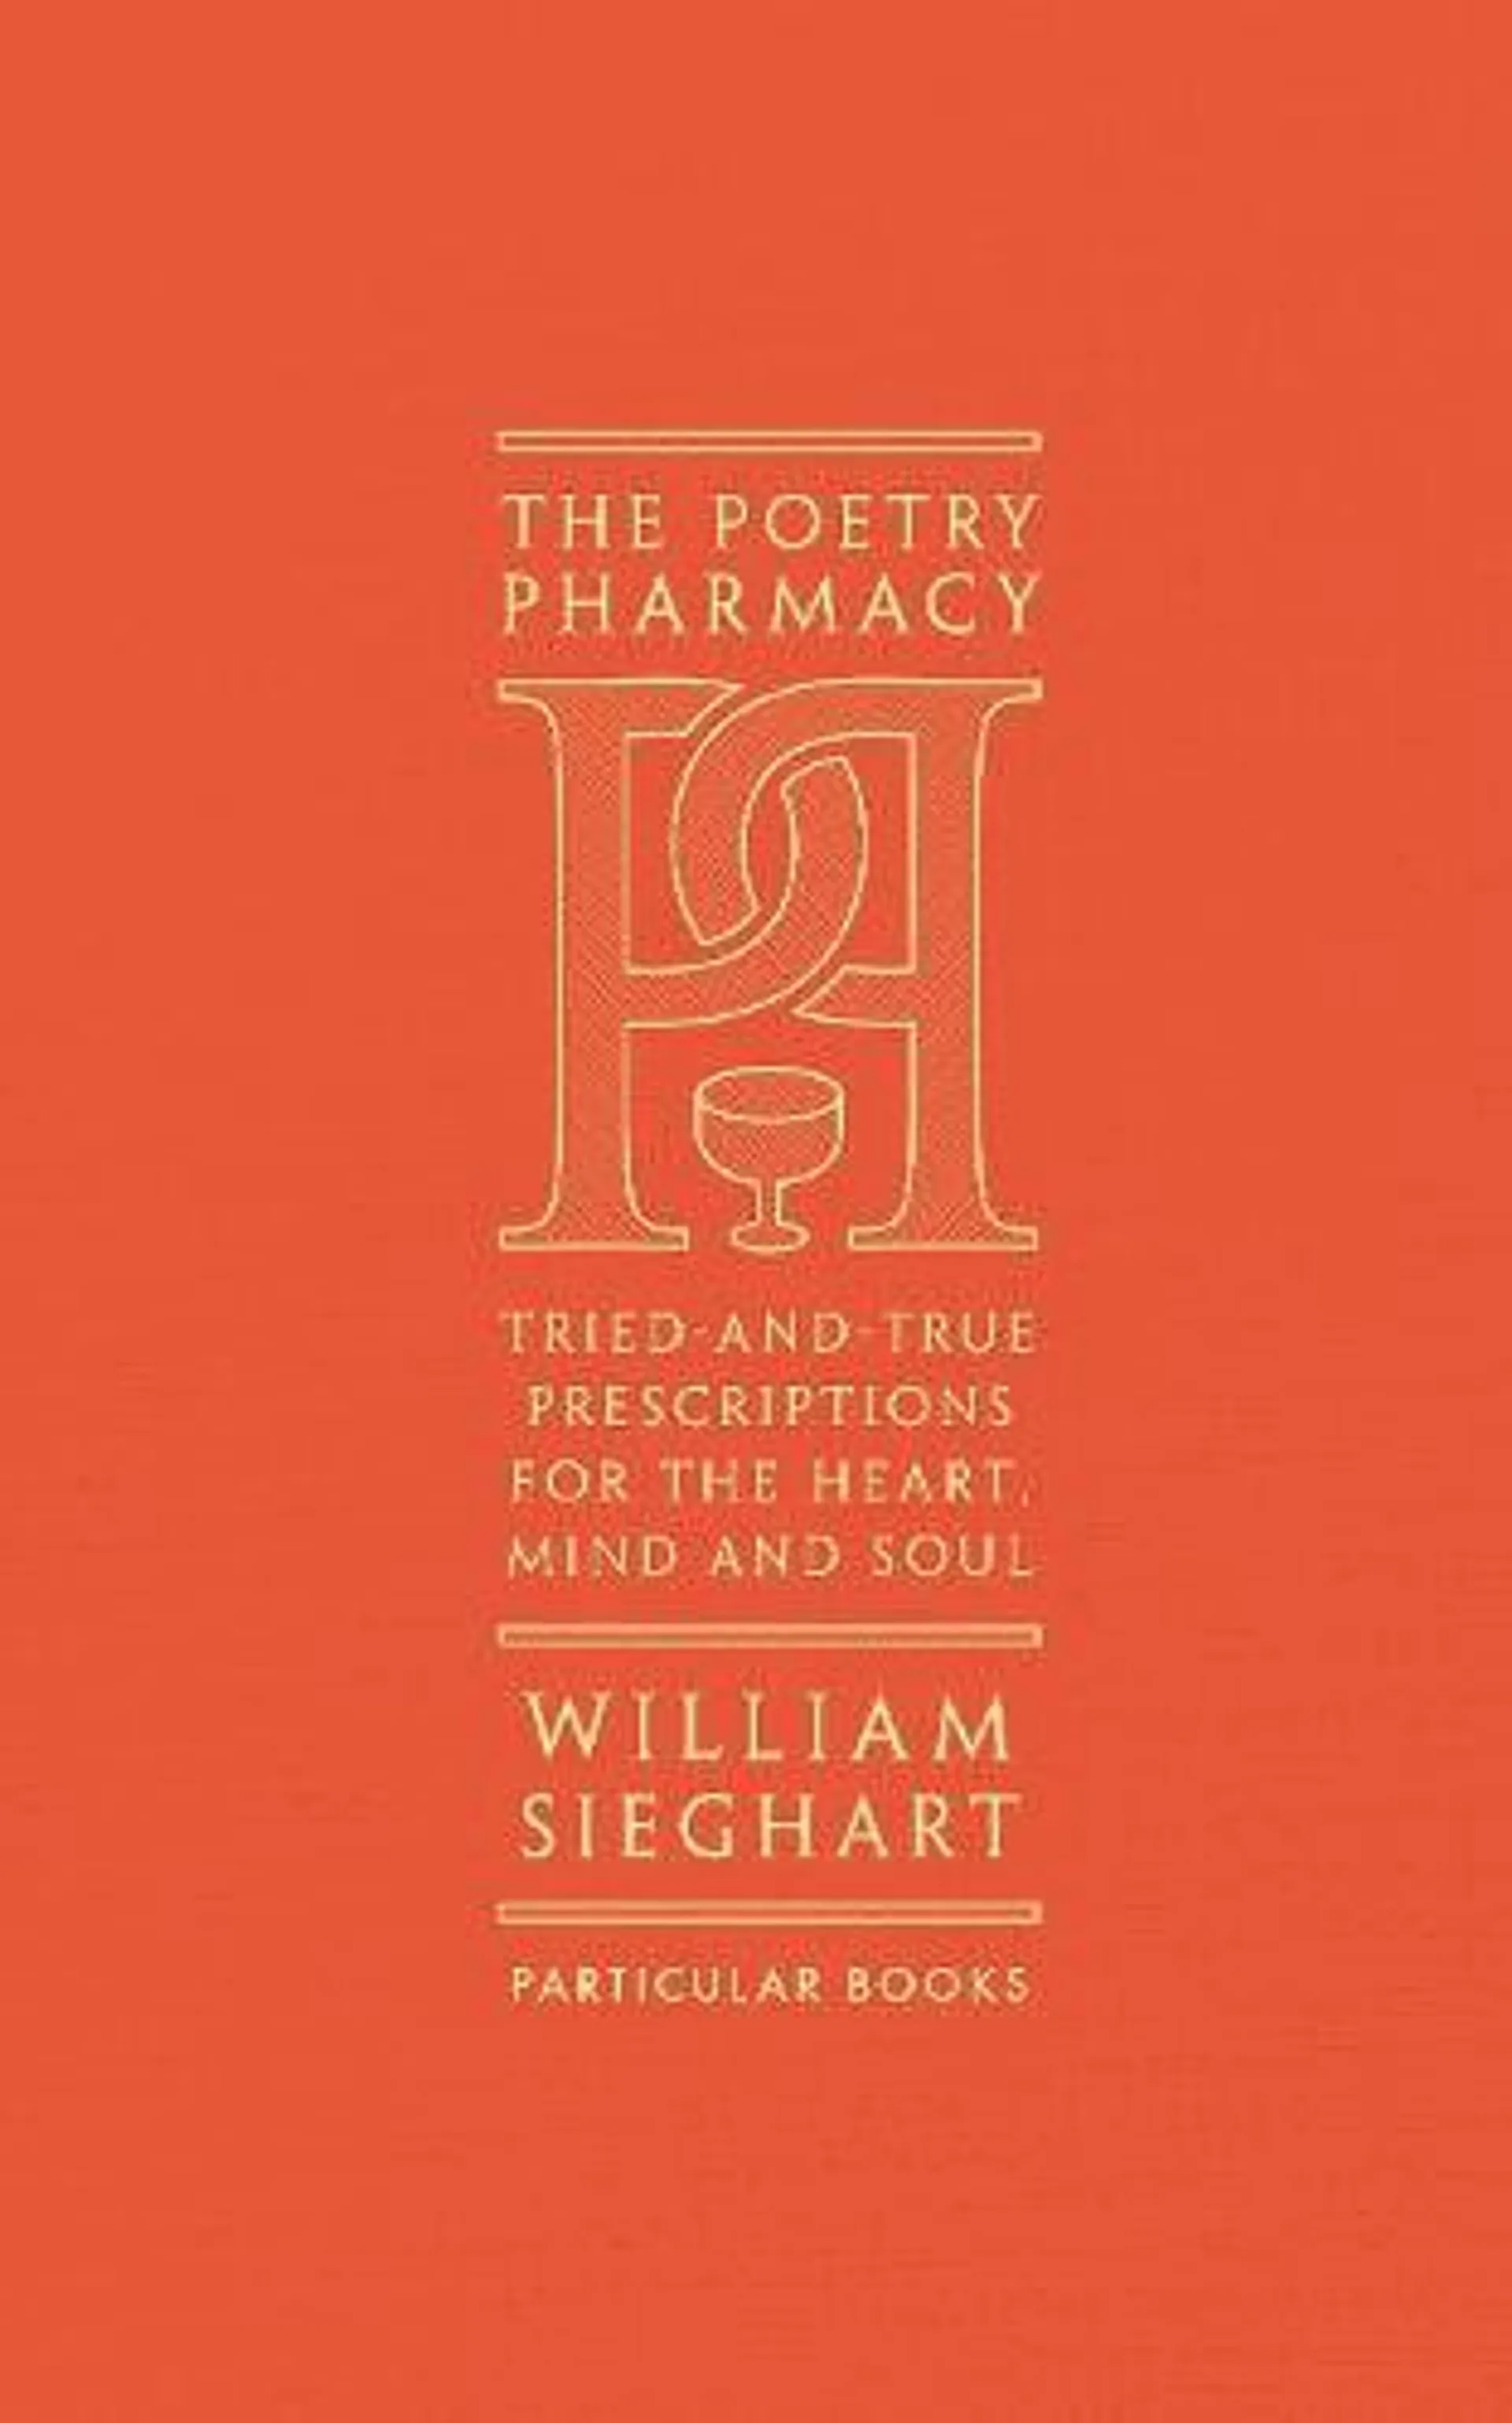 The Poetry Pharmacy: Tried-and-True Prescriptions for the Heart, Mind and Soul (Hardback)